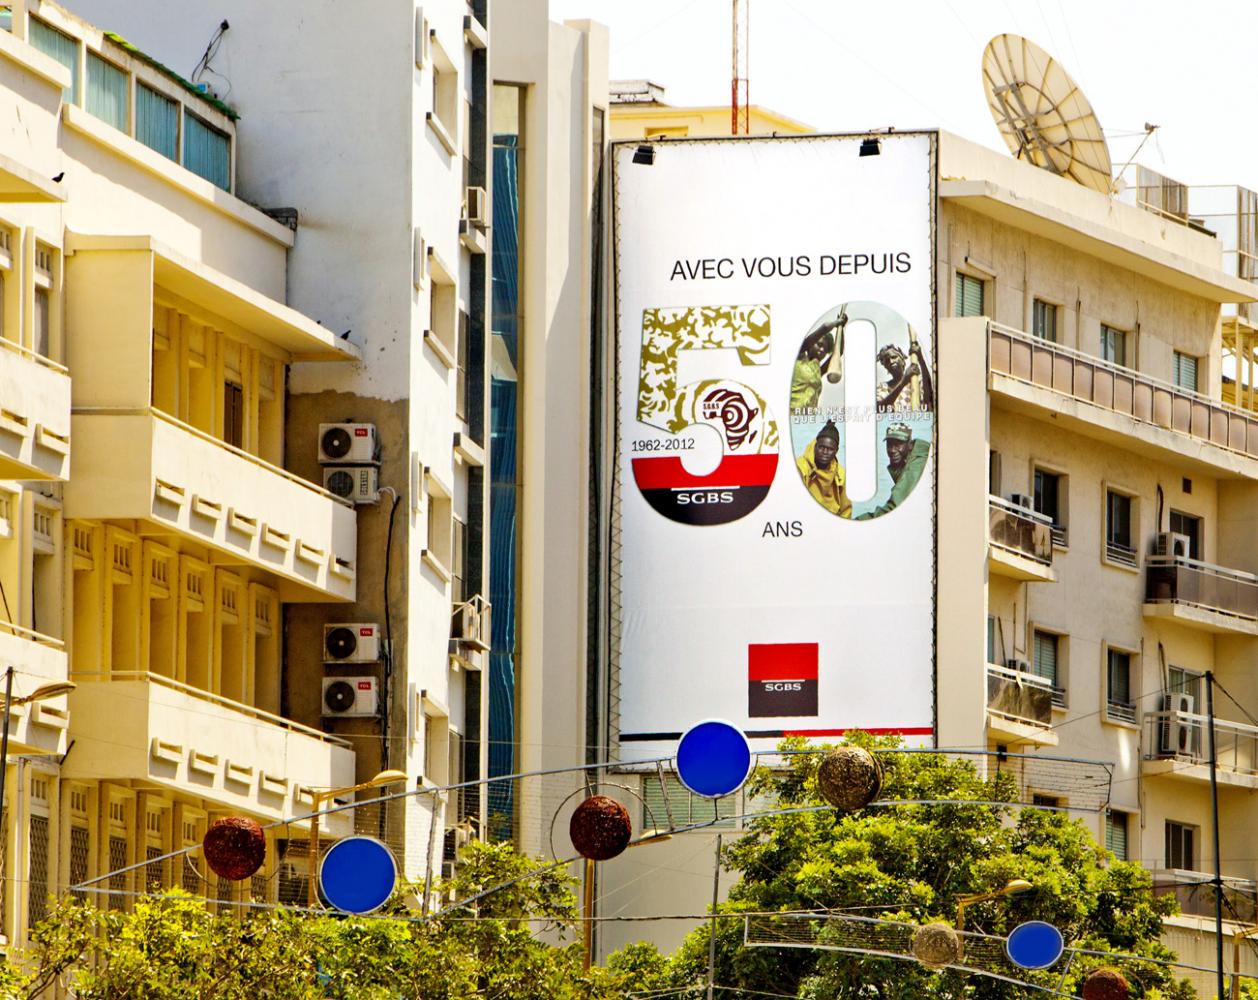 50 years anniversary communication campaign for Societe Generale bank in Senegal